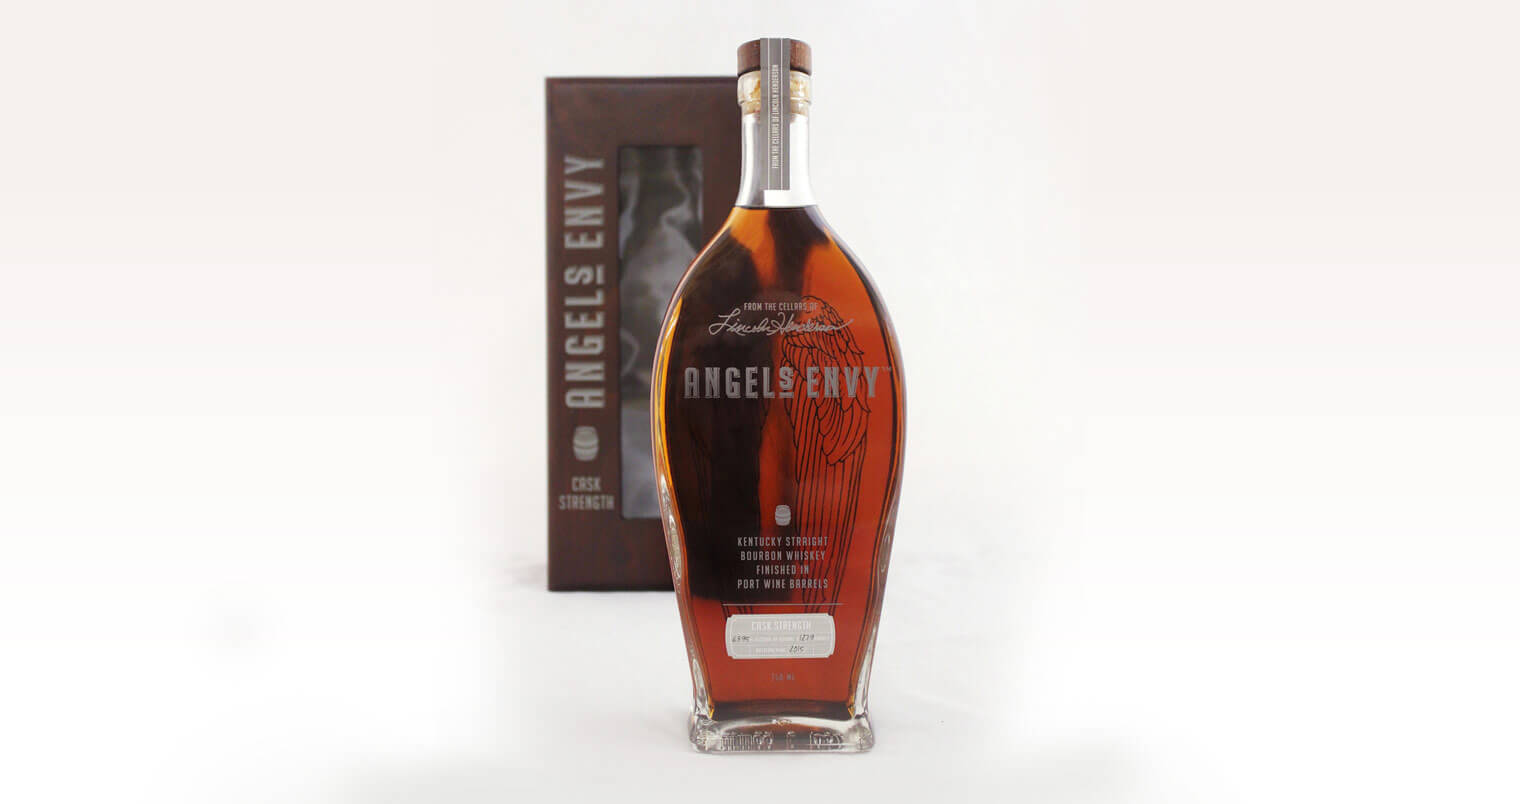 Angel's Envy Announces Cask Strength Limited-Edition Release, bottle and package